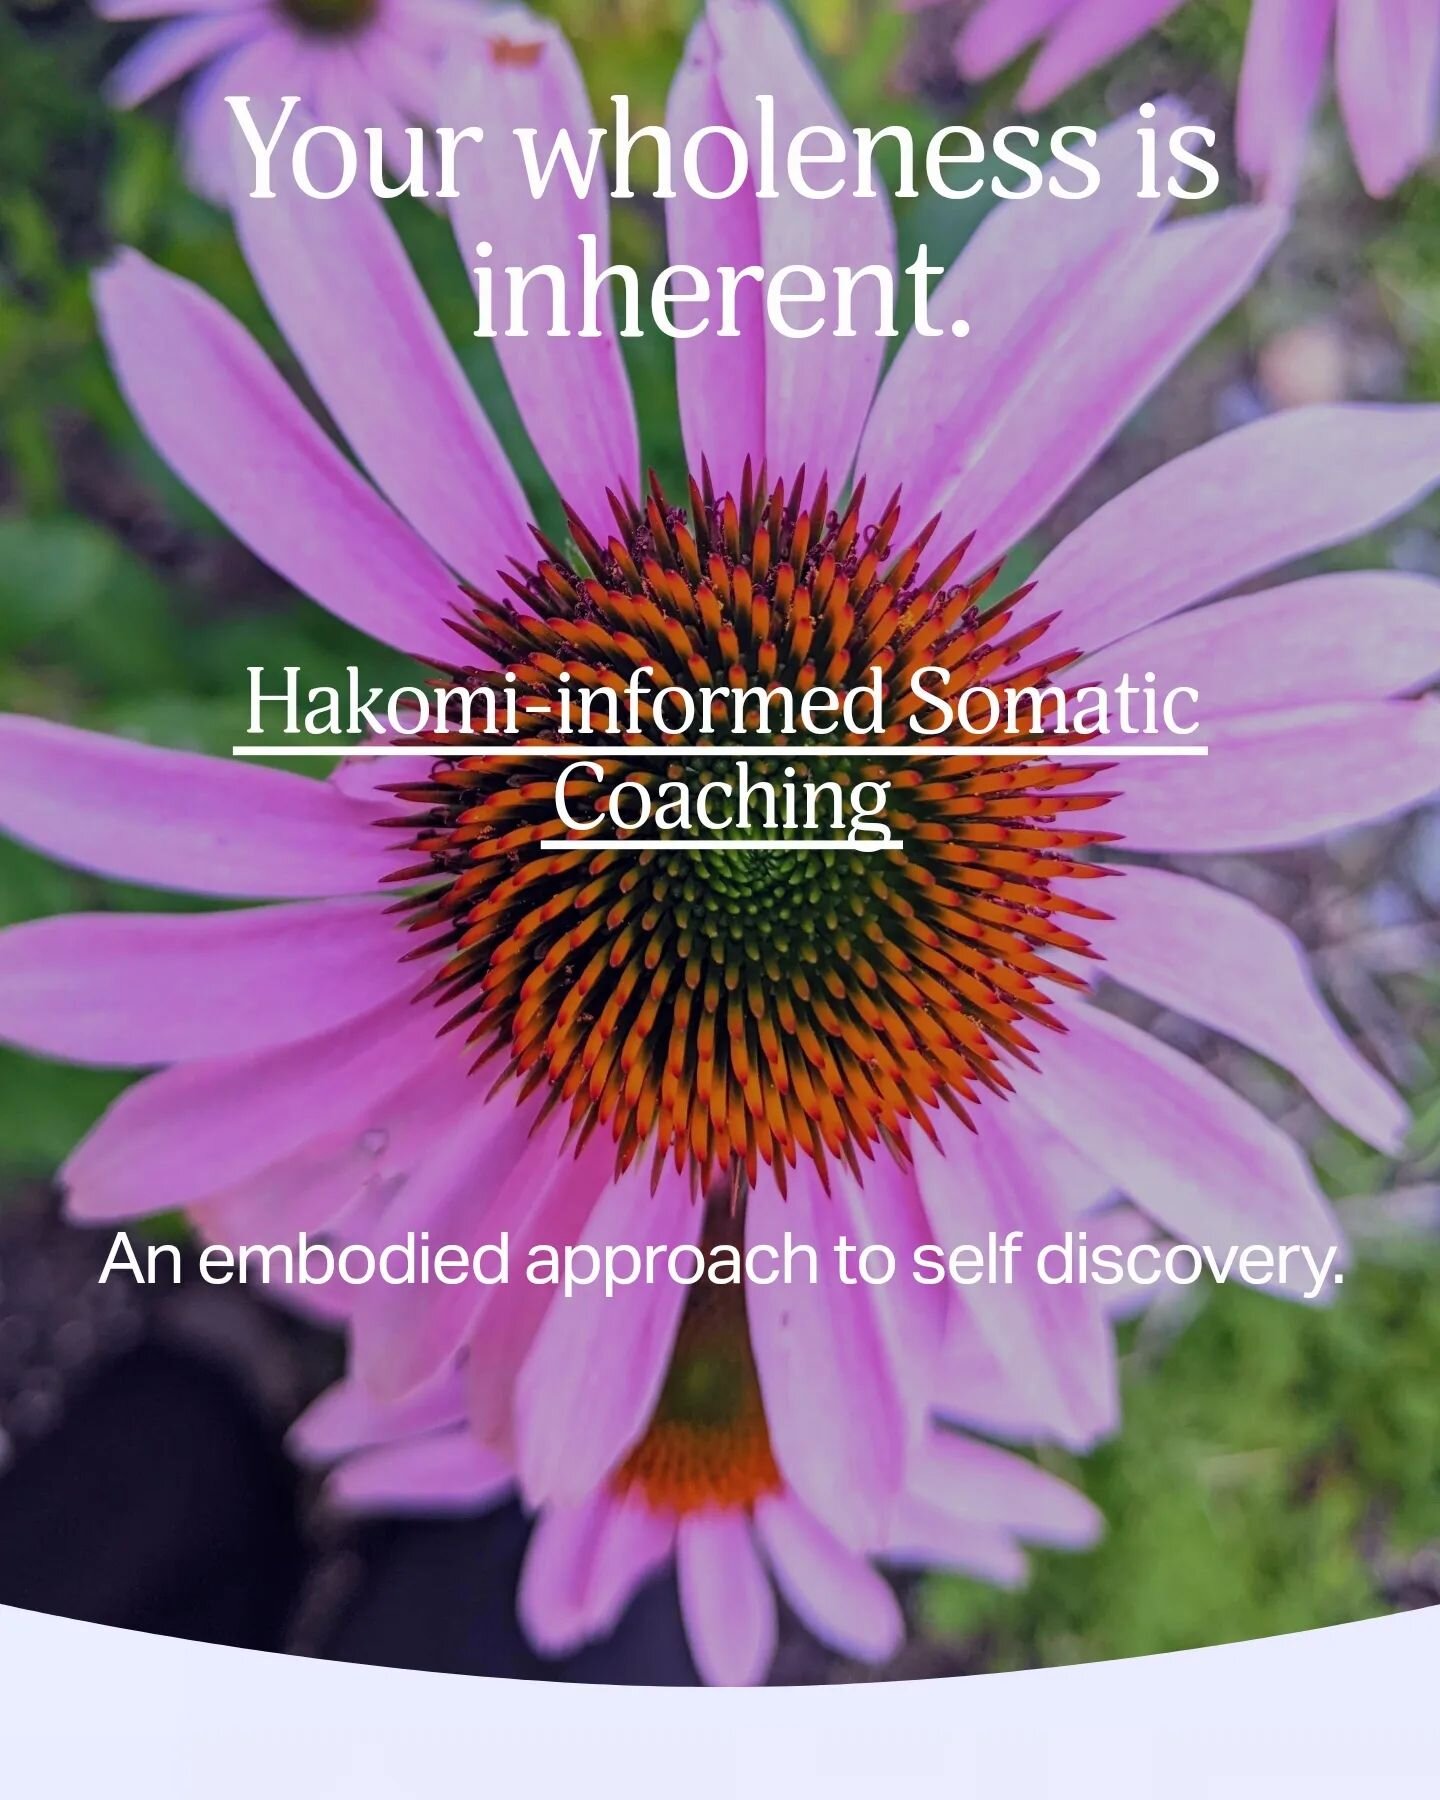 I'm so excited to be sharing this with you all!

Check the Iink in my B!0. 

Early-bird ends on Wednesday, March 27th.

Supporting you to remember the wholeness already inherent within you. 💓

#sensitivity #sensitivityisastrength #spoonies #chronicp